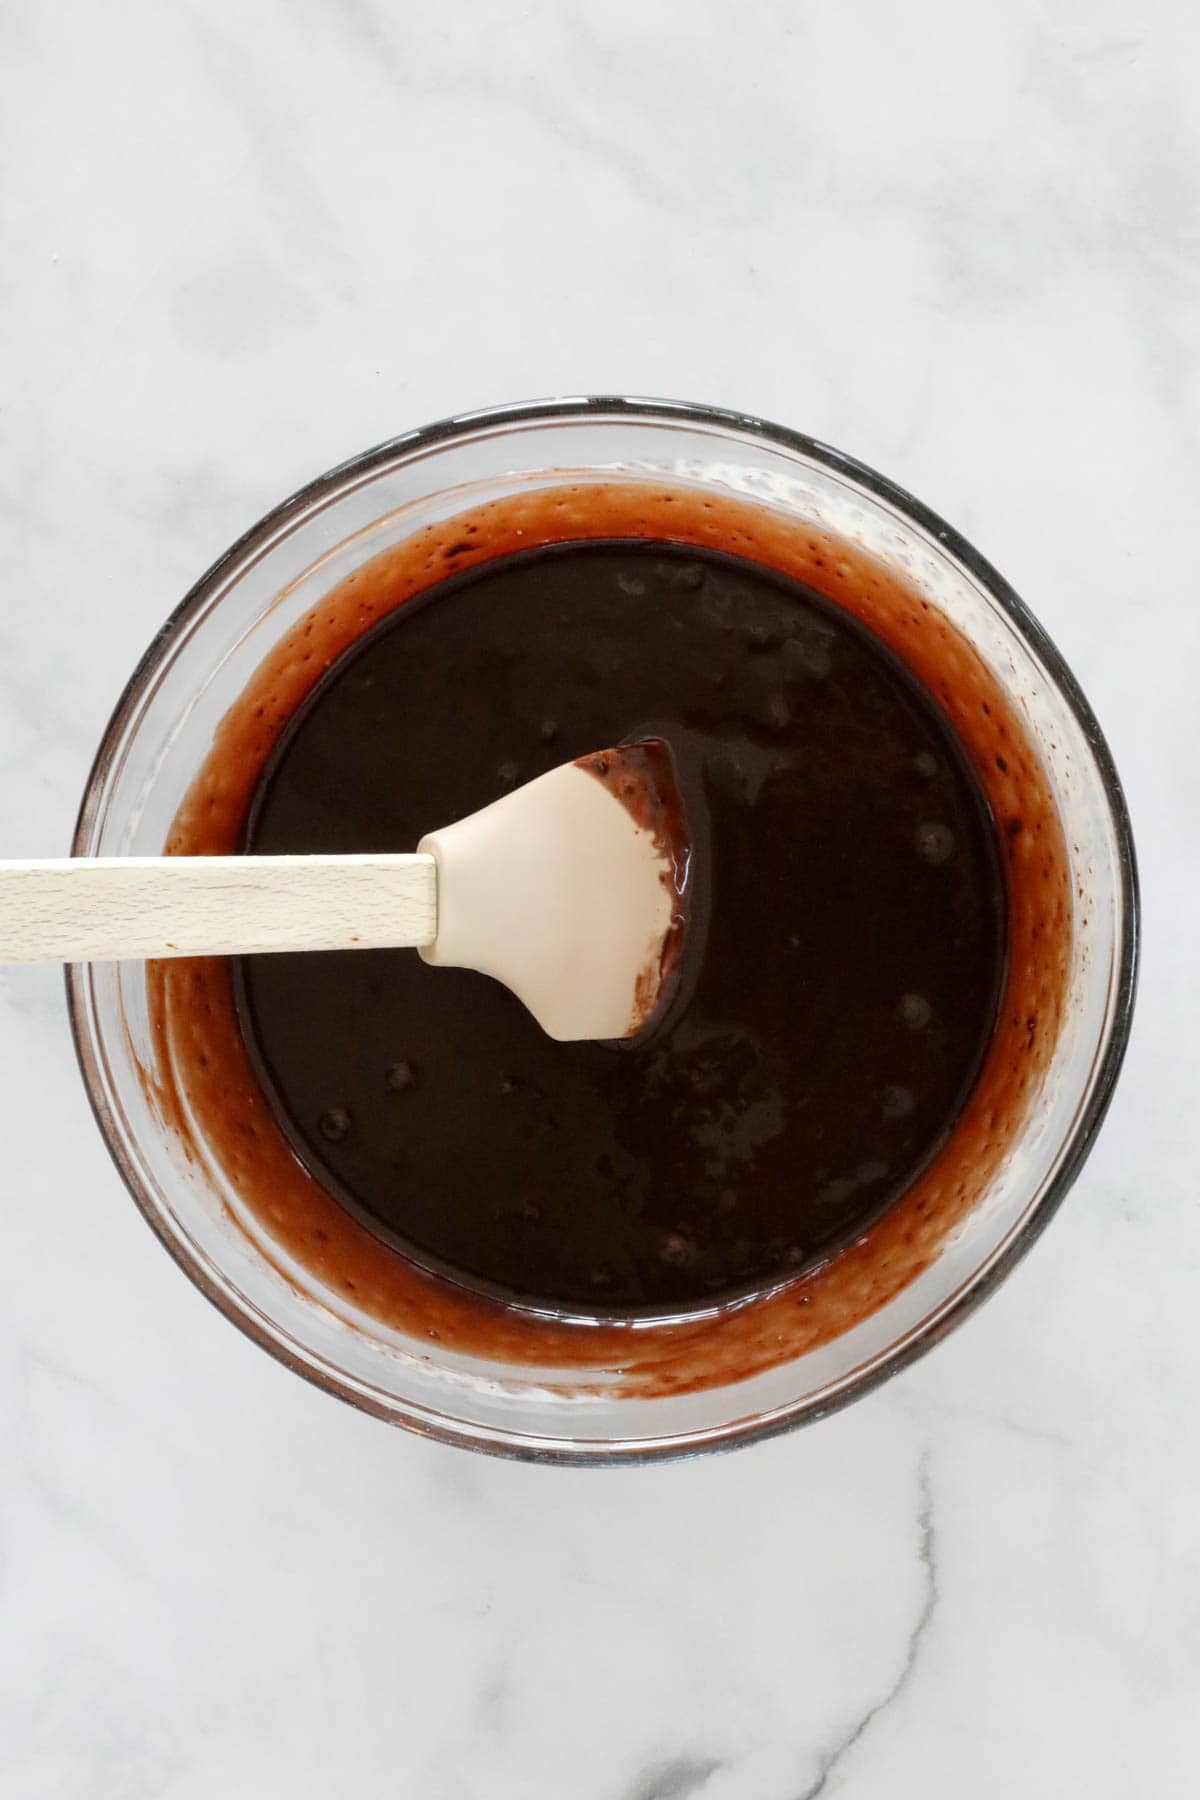 Cream and melted chocolate stirred with a wooden spoon in a glass bowl.